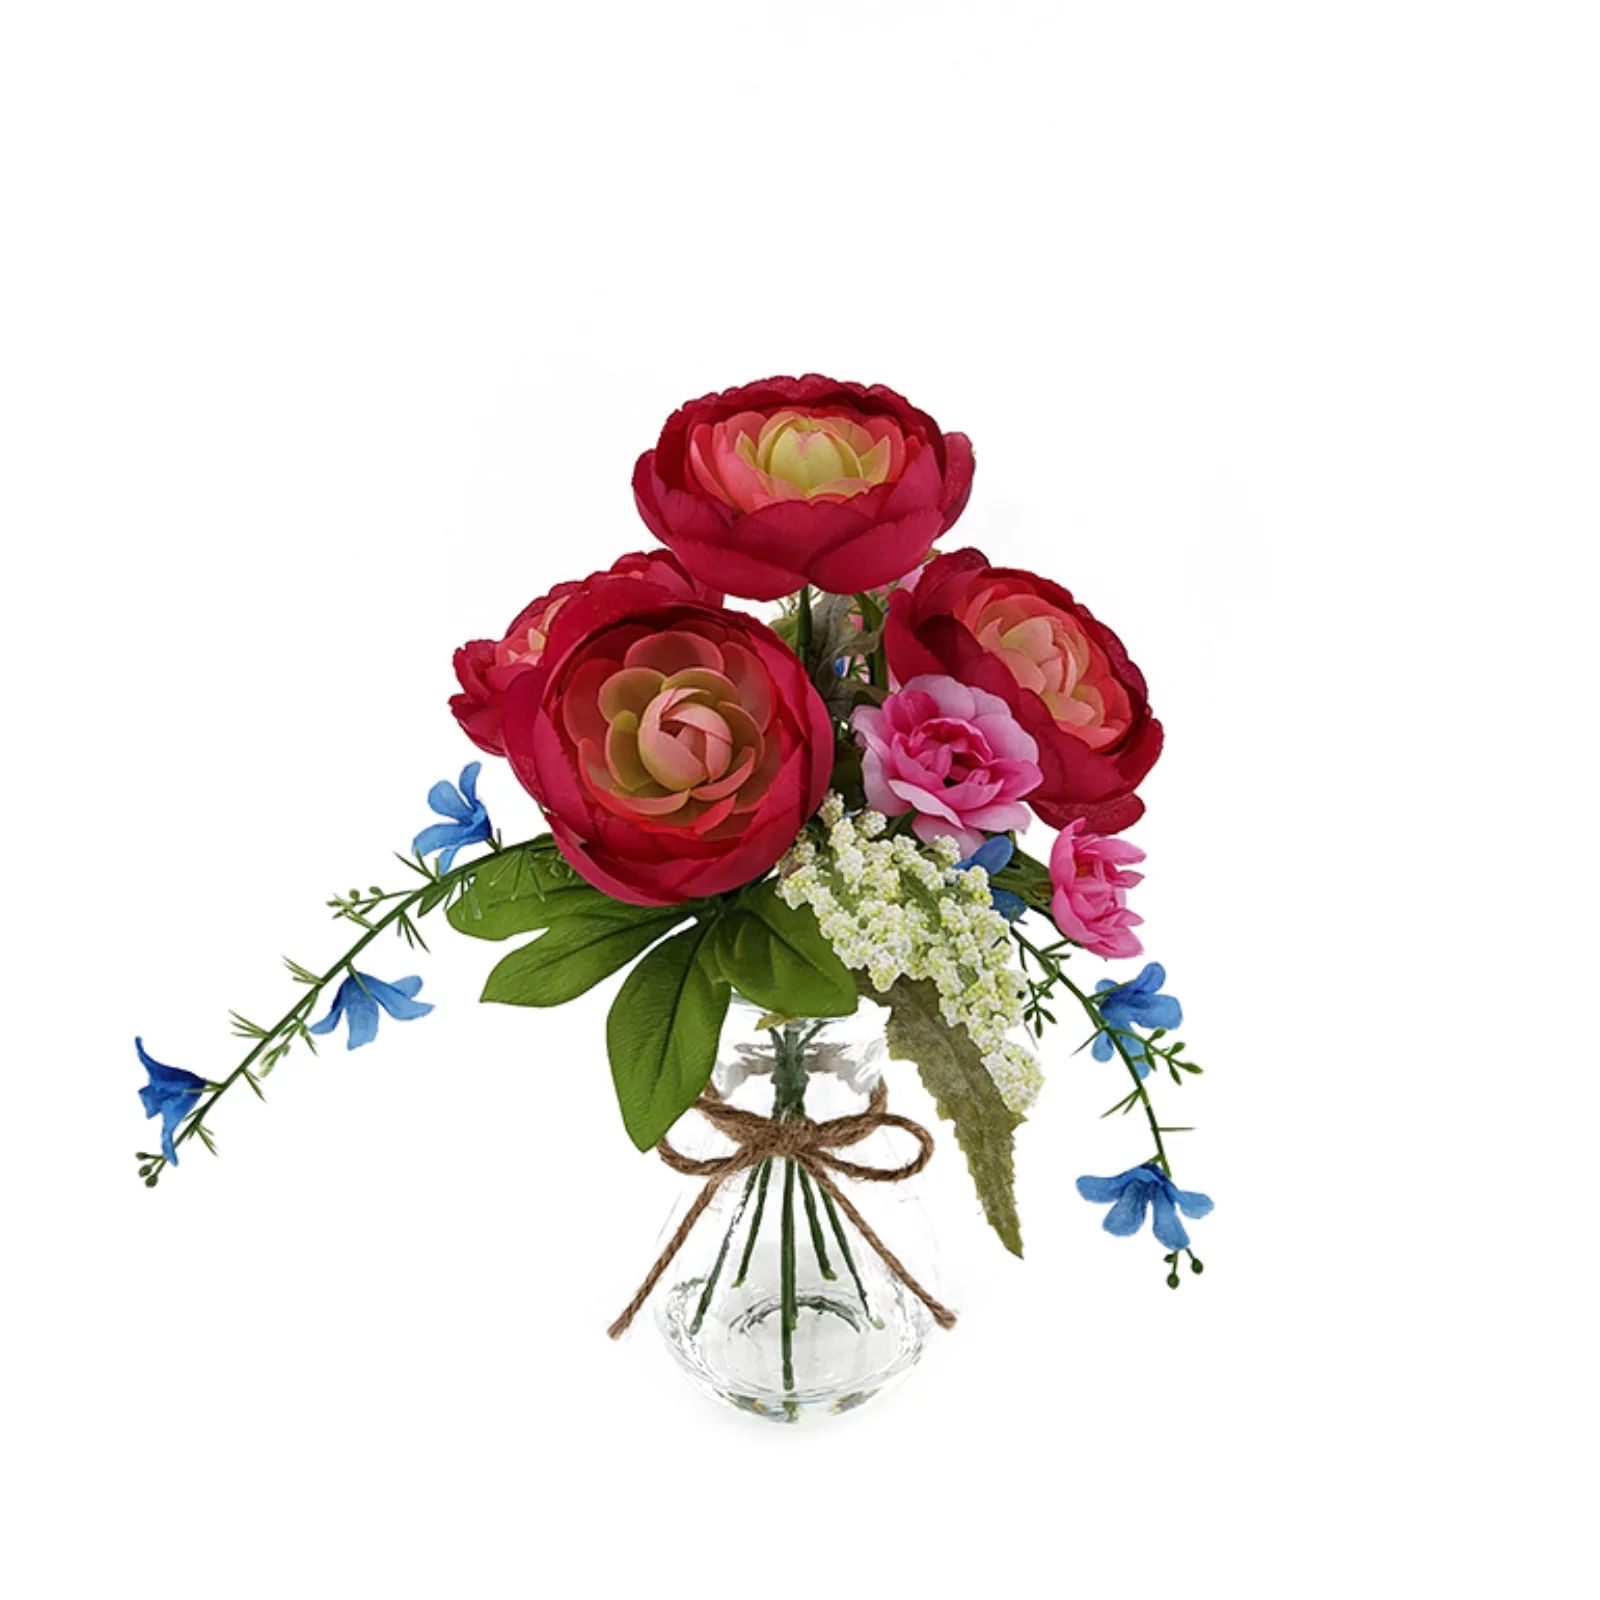 Mainstays 10.75" Artificial Flower with Glass, Ranunculus, Fuchsia Color | Walmart (US)